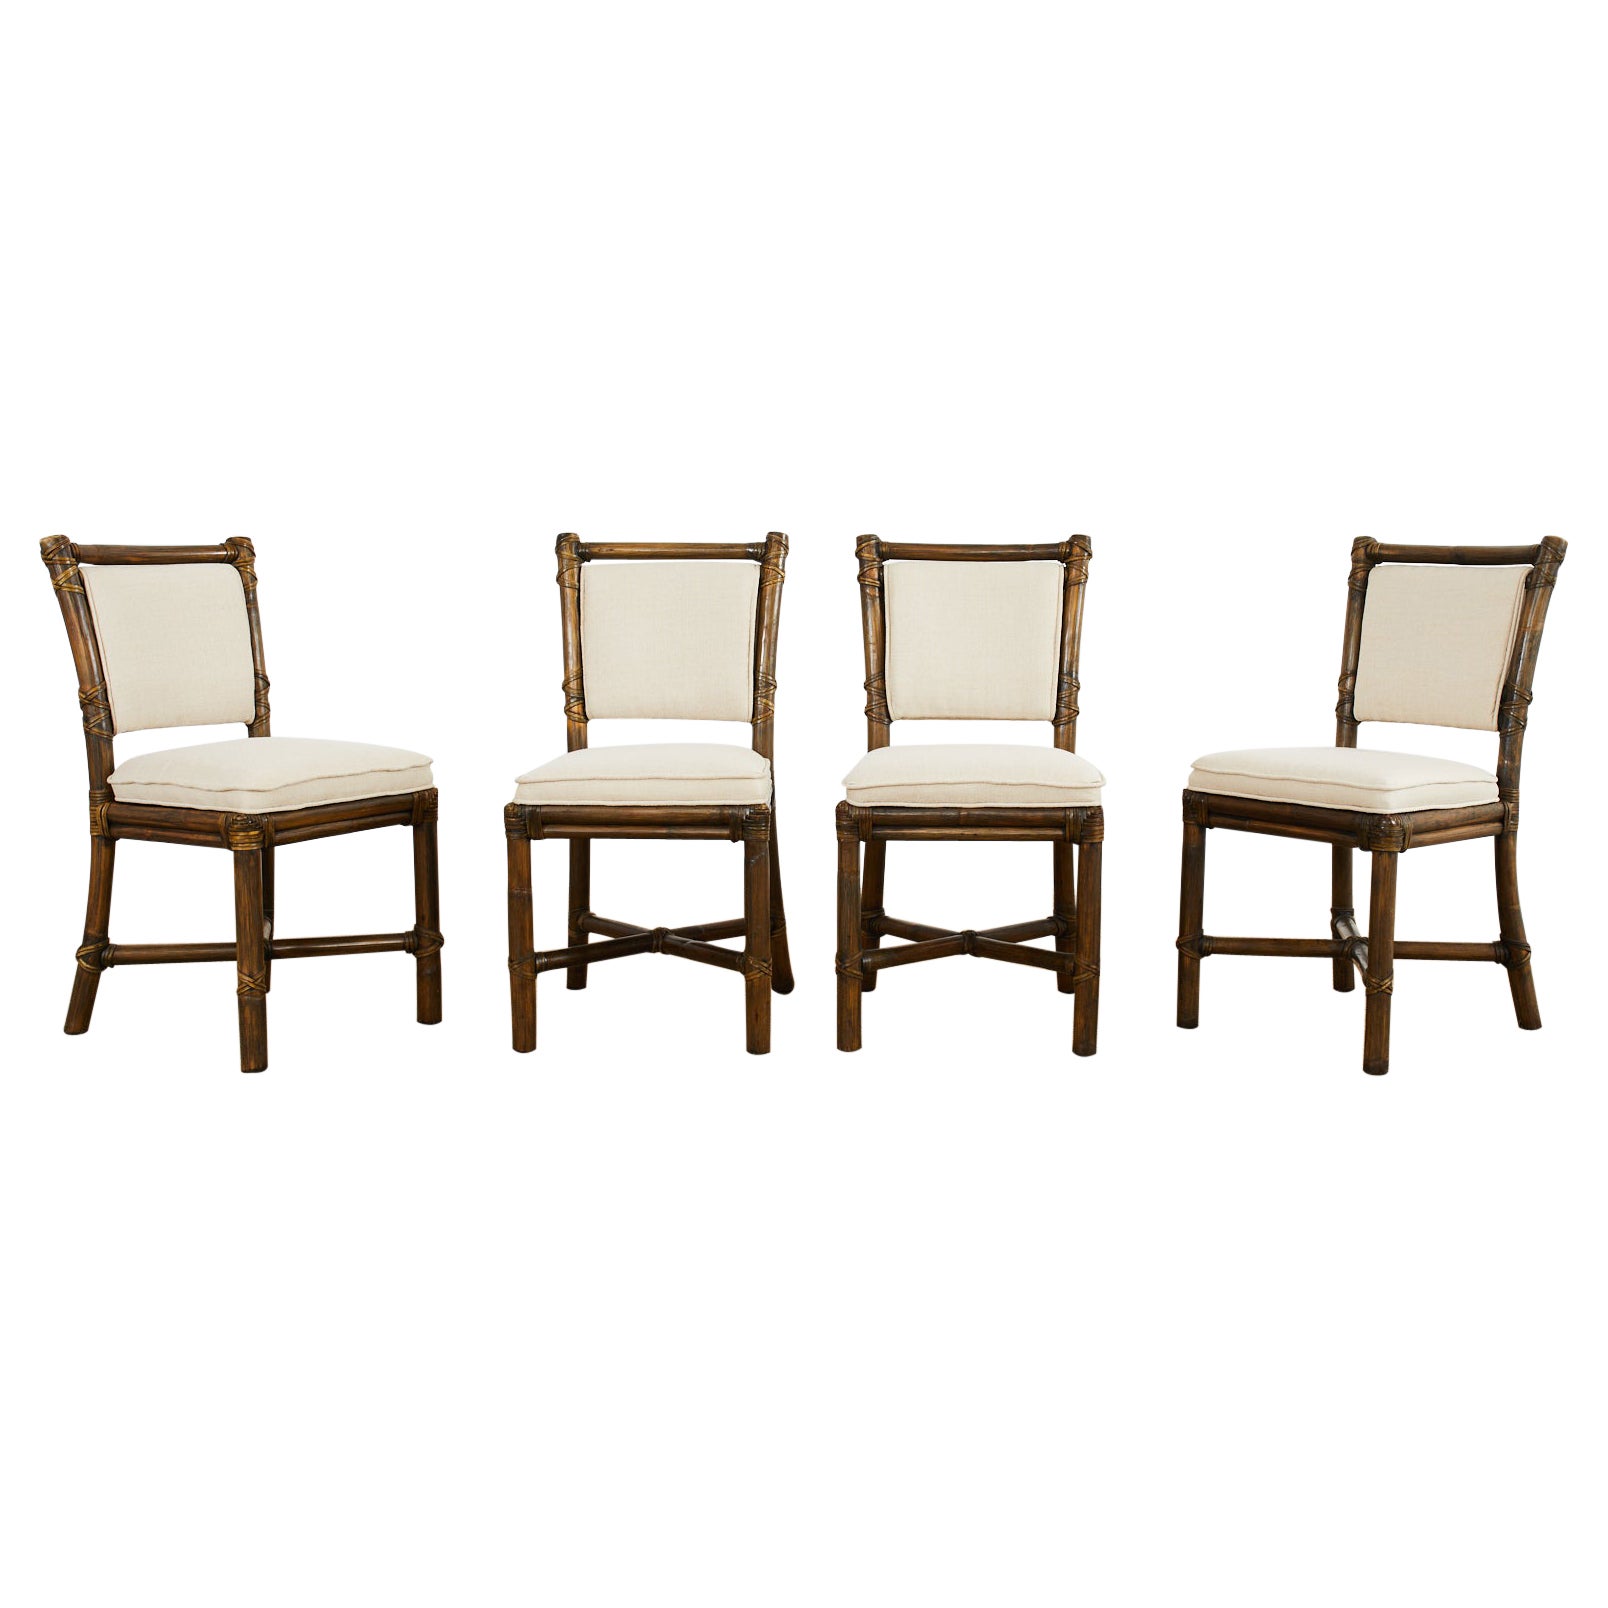 Set of Four McGuire Organic Modern Rattan Dining Chairs